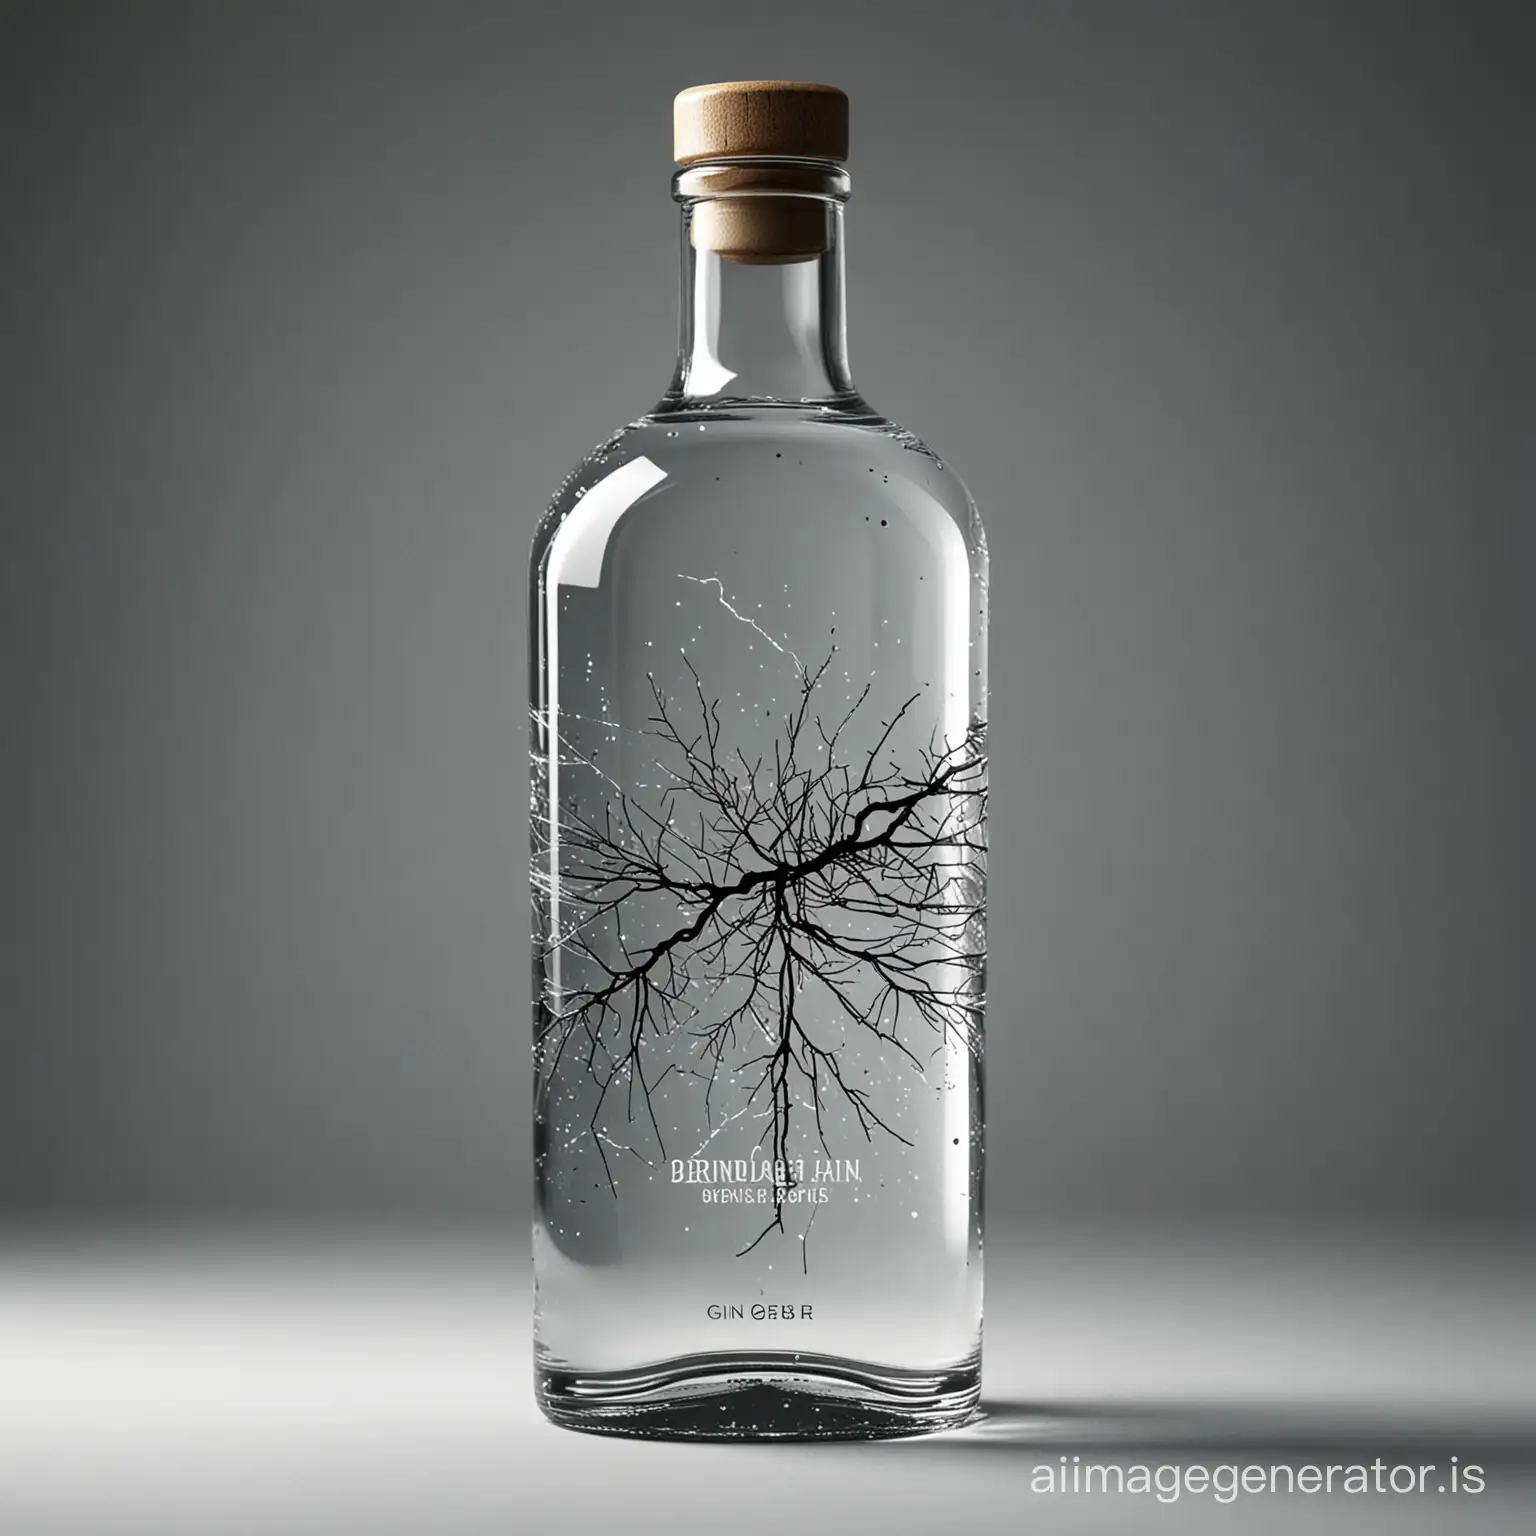 can you create an image for a design of a bottle with an outline of a crack through the bottle. This is for a new brand of gin called Broken Bottle Gin